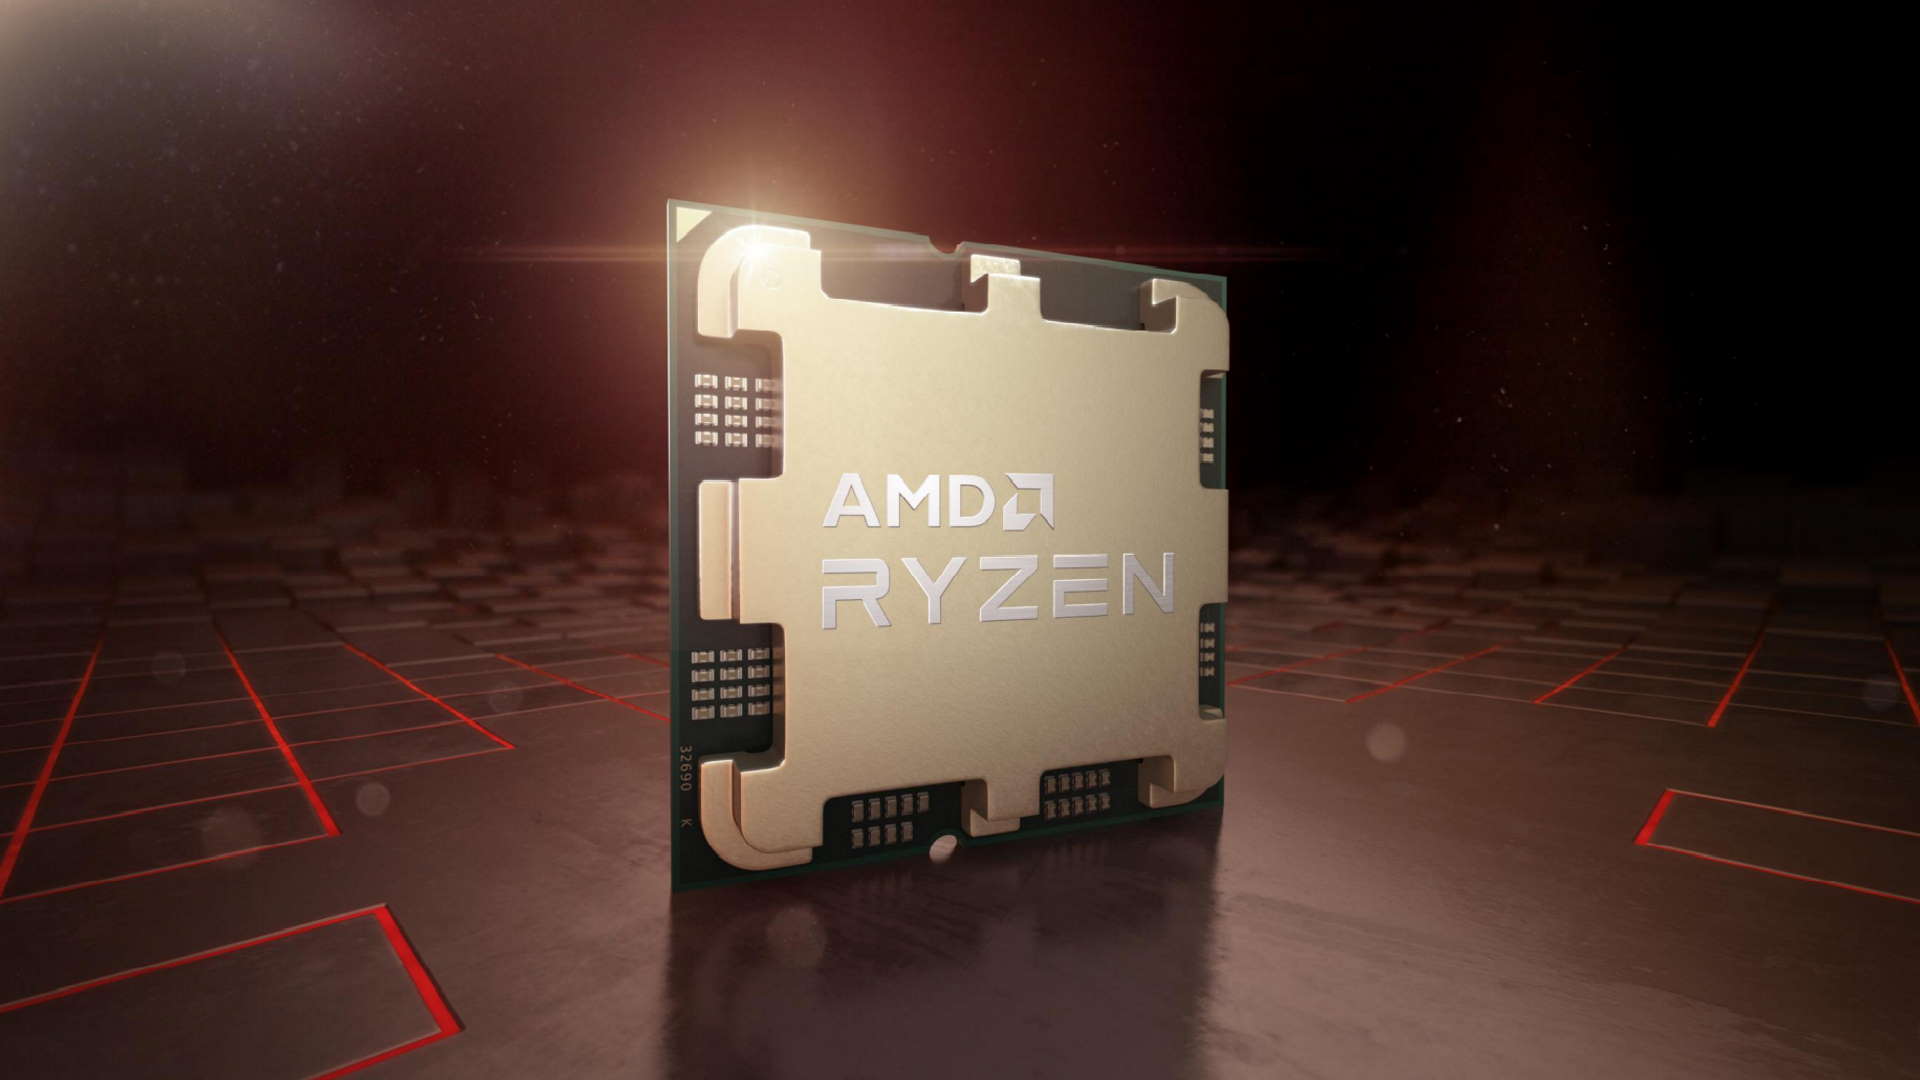 Details on AMD’s Ryzen 8000 APUs have leaked, with the eight core 8700G topping the list with 12 CUs